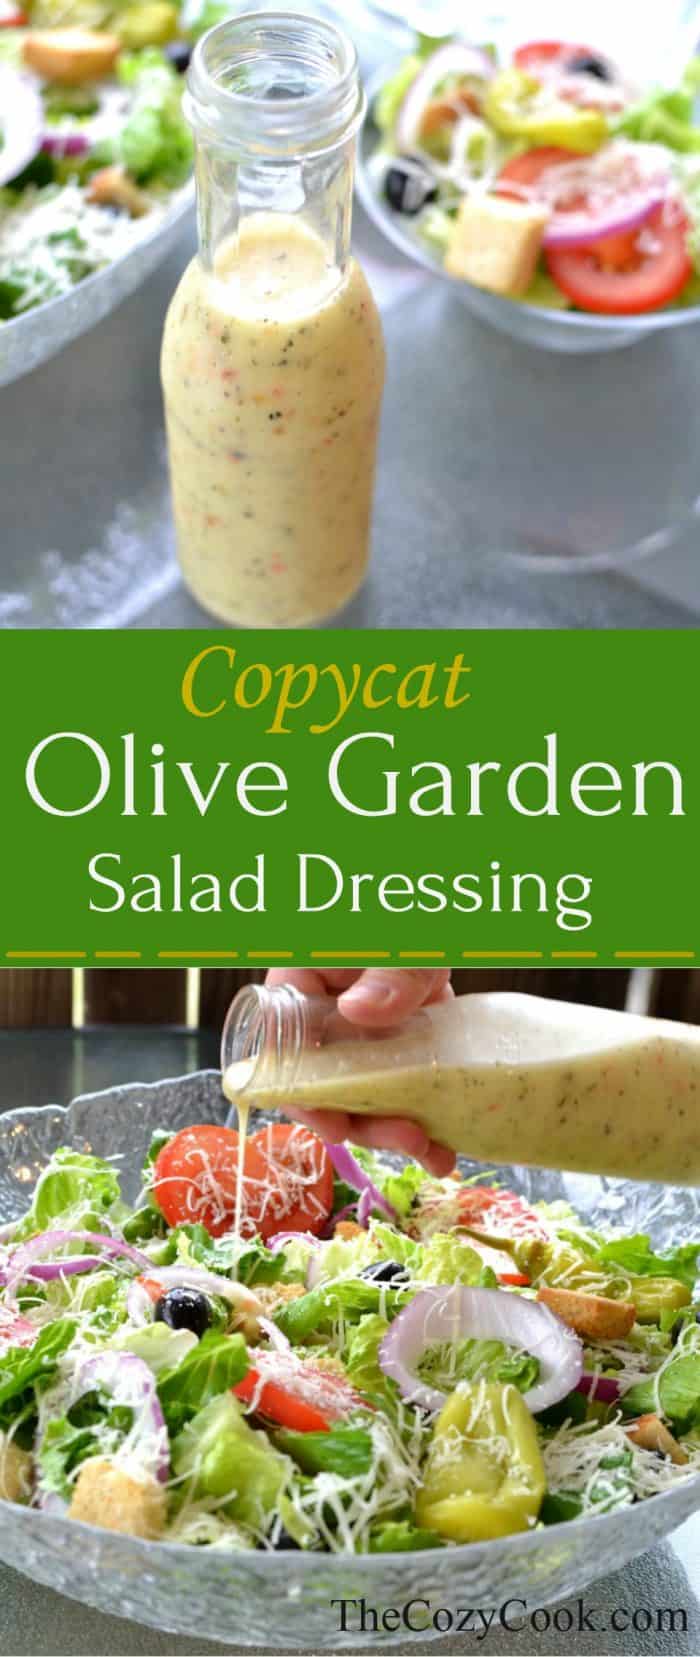 This homemade copycat Olive Garden Salad Dressing is the perfect accompaniment to fresh lettuce and salad ingredients- and so easy to make at home! | The Cozy Cook | #Copycat #SaladDressing #OliveGarden #Italian #Vegetarian #Healthy #ItalianSaladDressing #CopycatOliveGarden